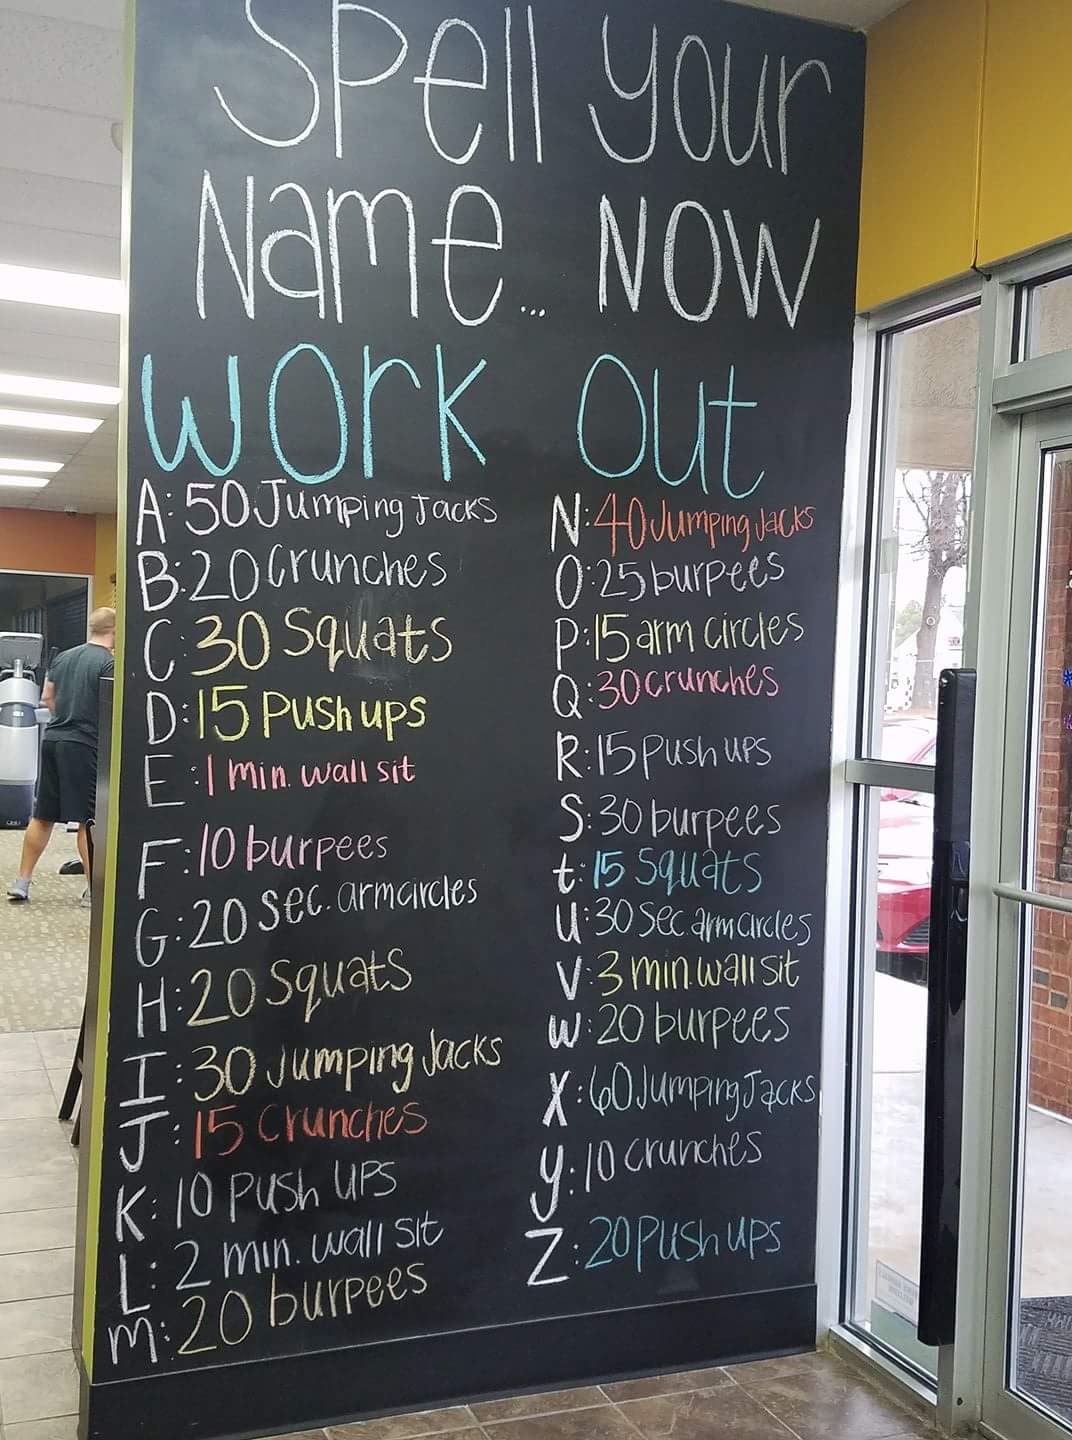 spell your name workout - 1 Spell your Name. Now work out A50 Jumping Jacks B20 crunches N40 Jumping jacks burpees P15 am circles crunches R15 Push ups burpees t15 Squats U 30 sec arm aurcles V 3 min. wali sit D15 Push ups min wall sit F10 burpees c. armc